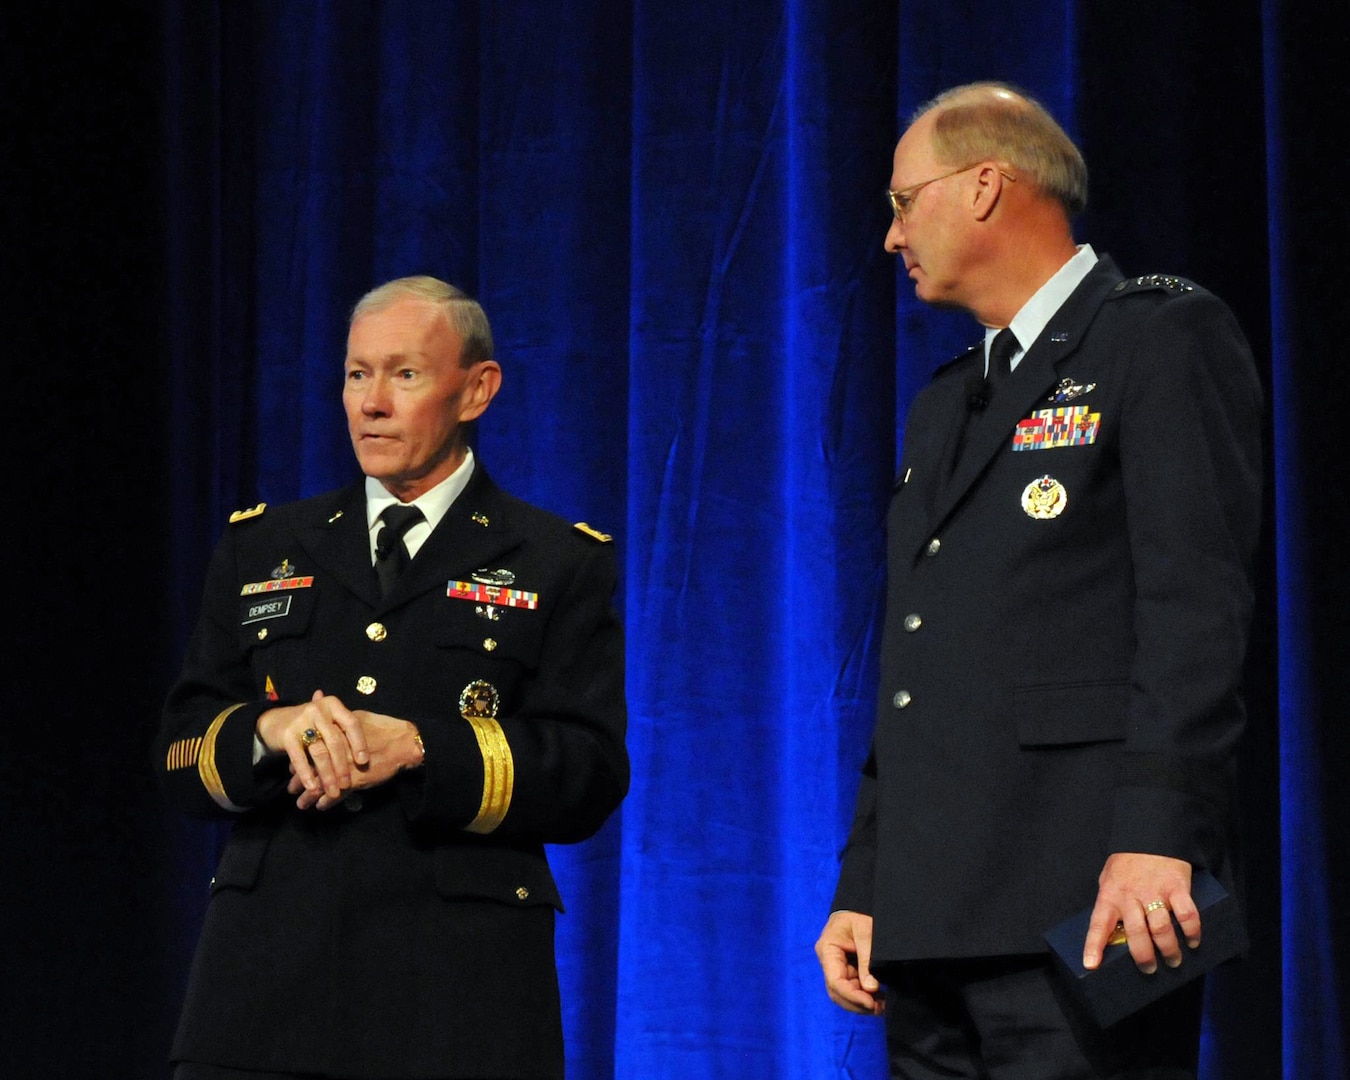 Army Gen. Martin Dempsey, the chairman of the joint chiefs of staff, and Air Force. Gen. Craig McKinley, the chief of the National Guard Bureau, during the National Guard's 2011 Joint Senior Leadership Conference at National Harbor, Md., on Nov. 7, 2011.